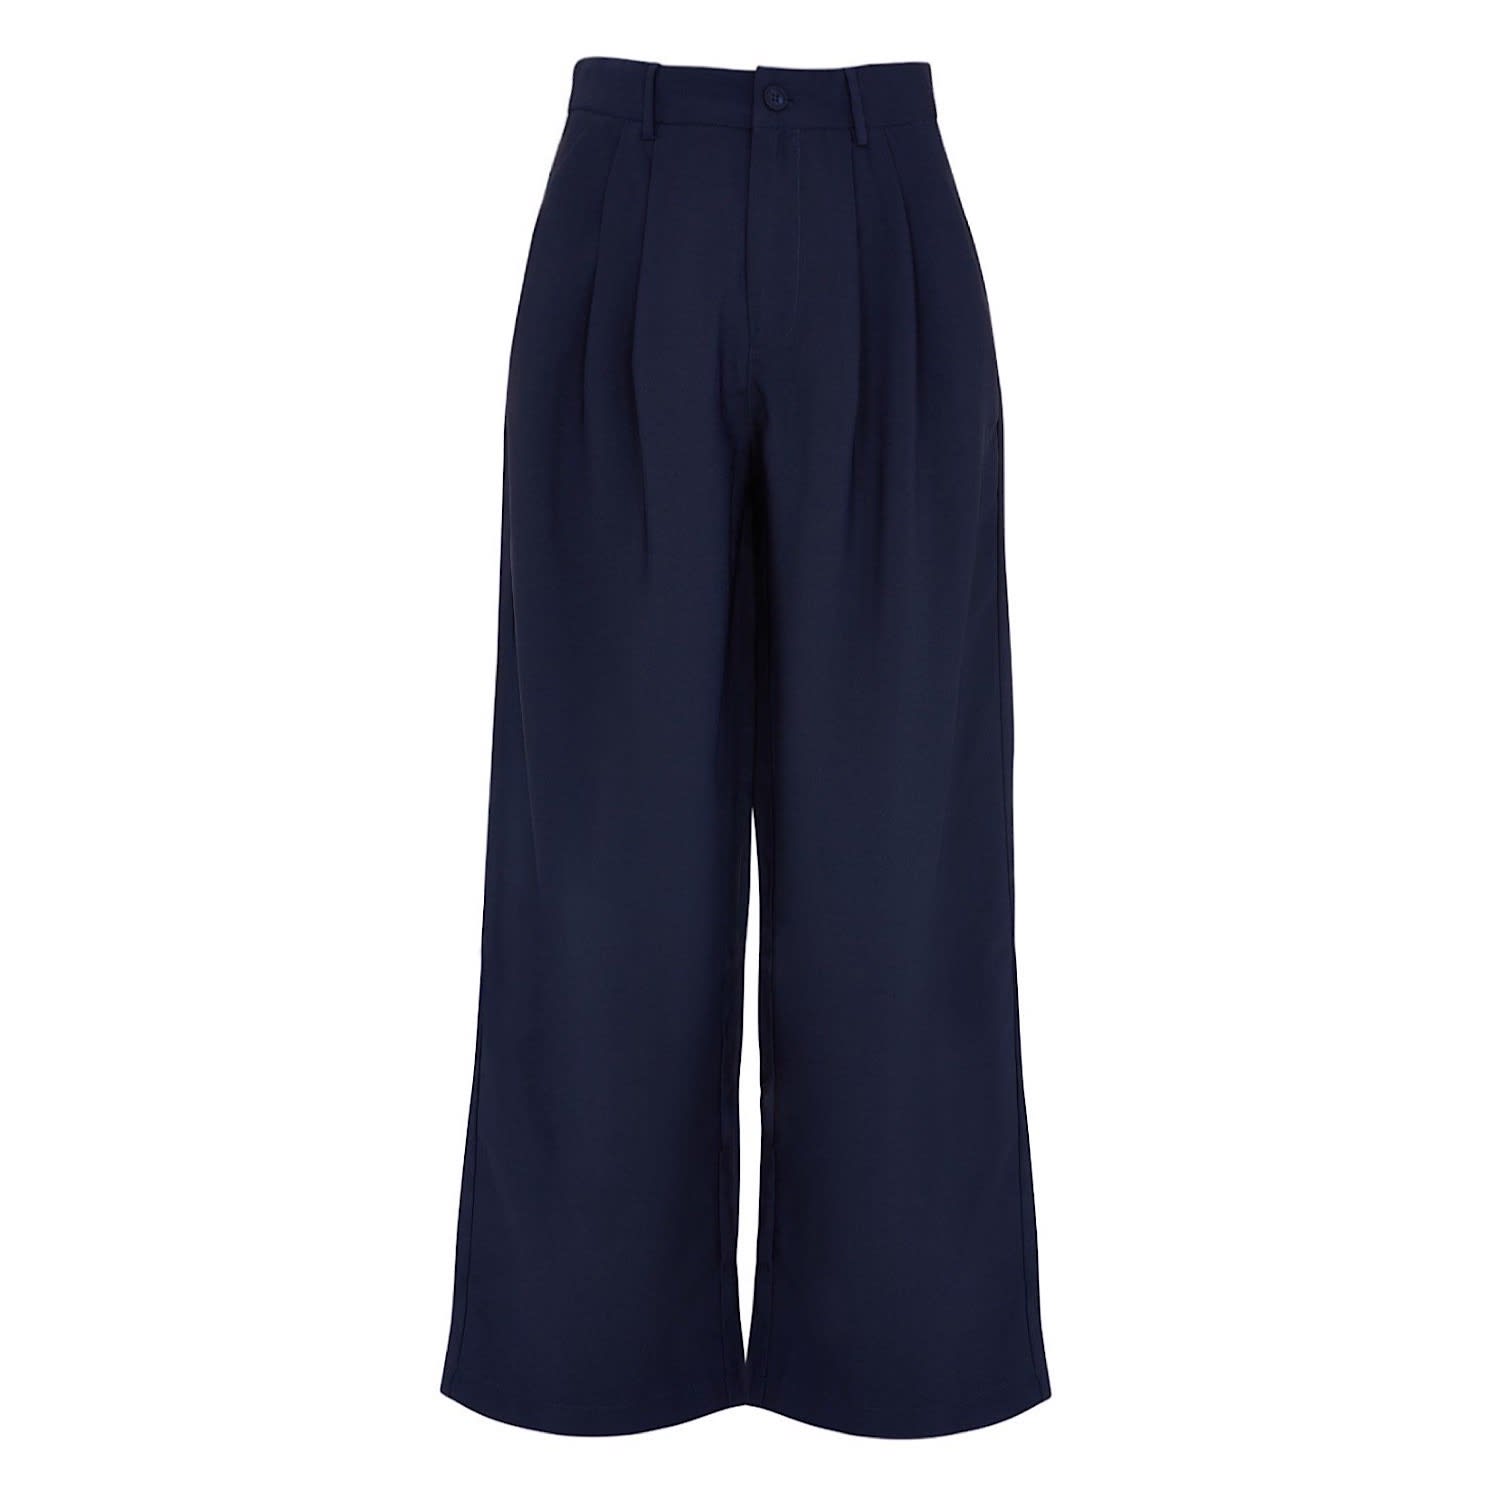 XXL only - high waist navy wool trousers with button fly and brace buttons  - Elgar Shirts